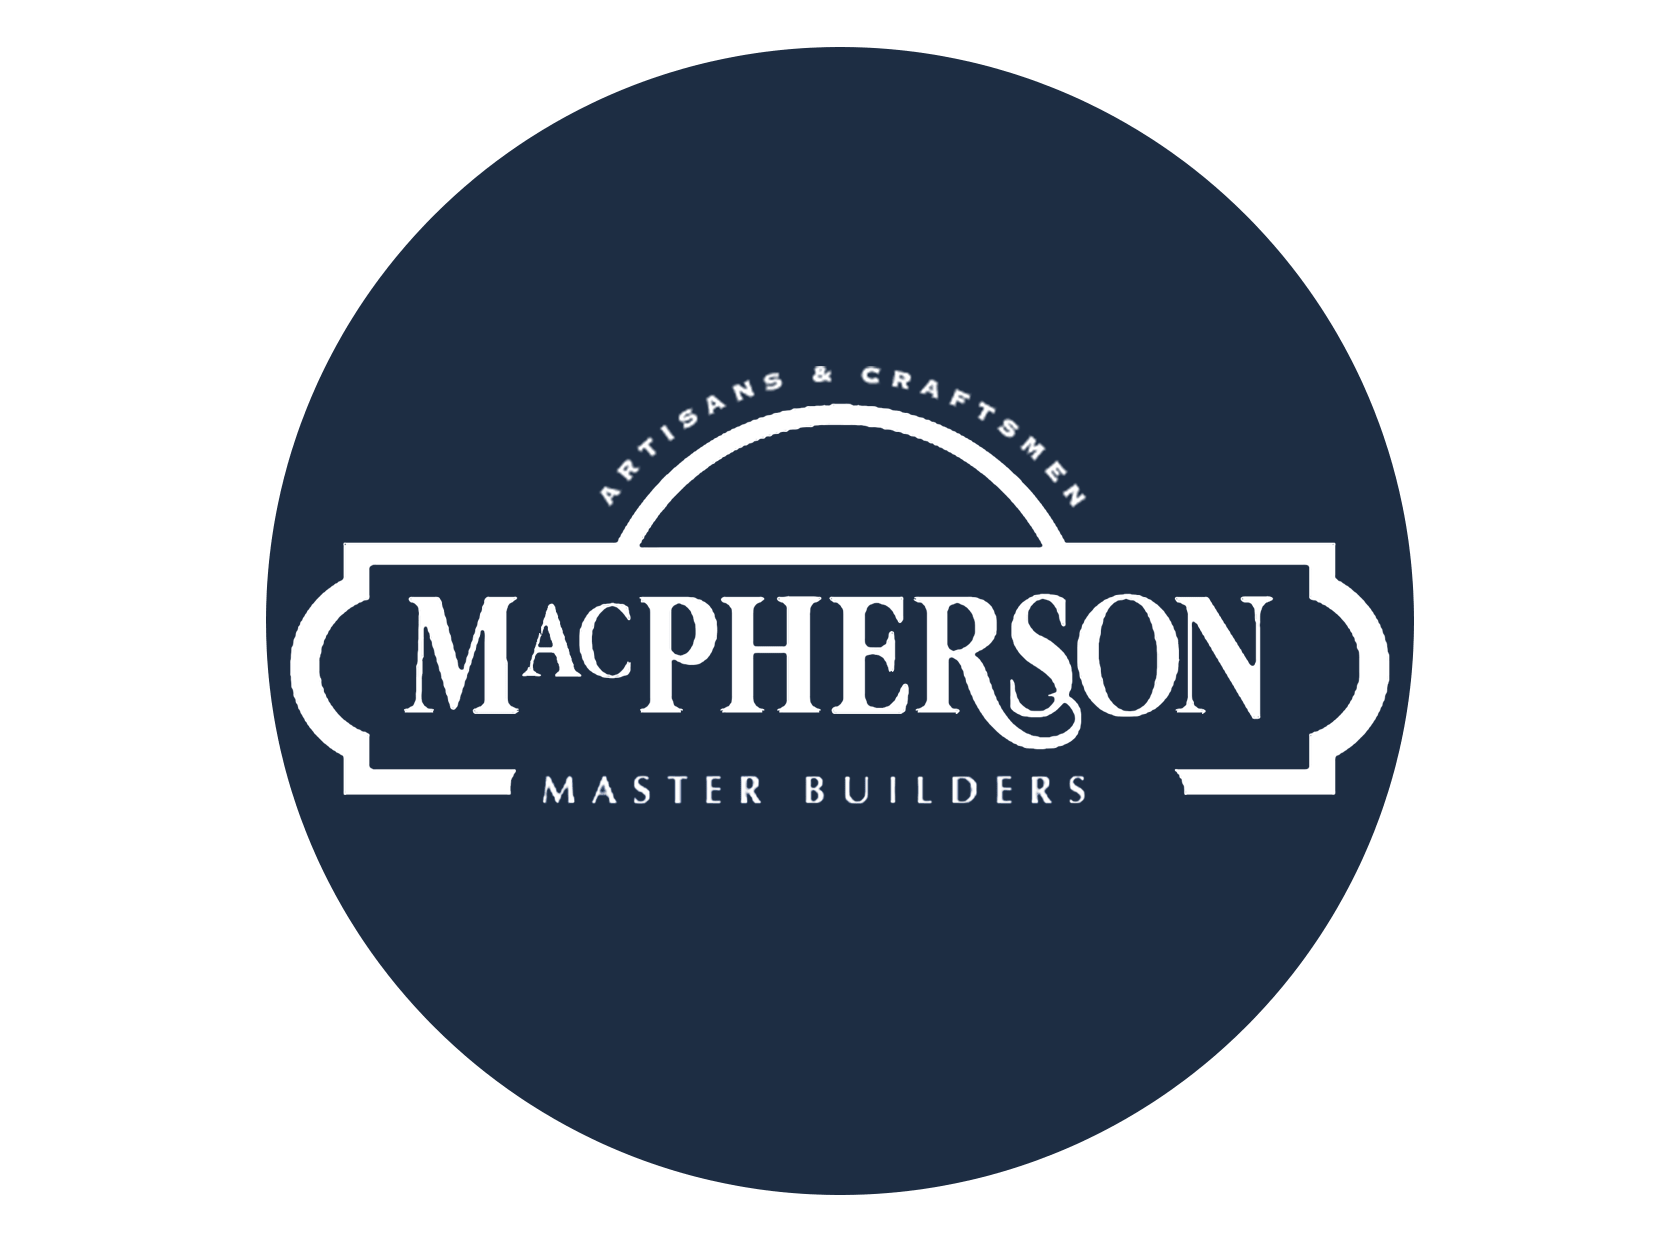 macpherson logo for Outdoor advertising